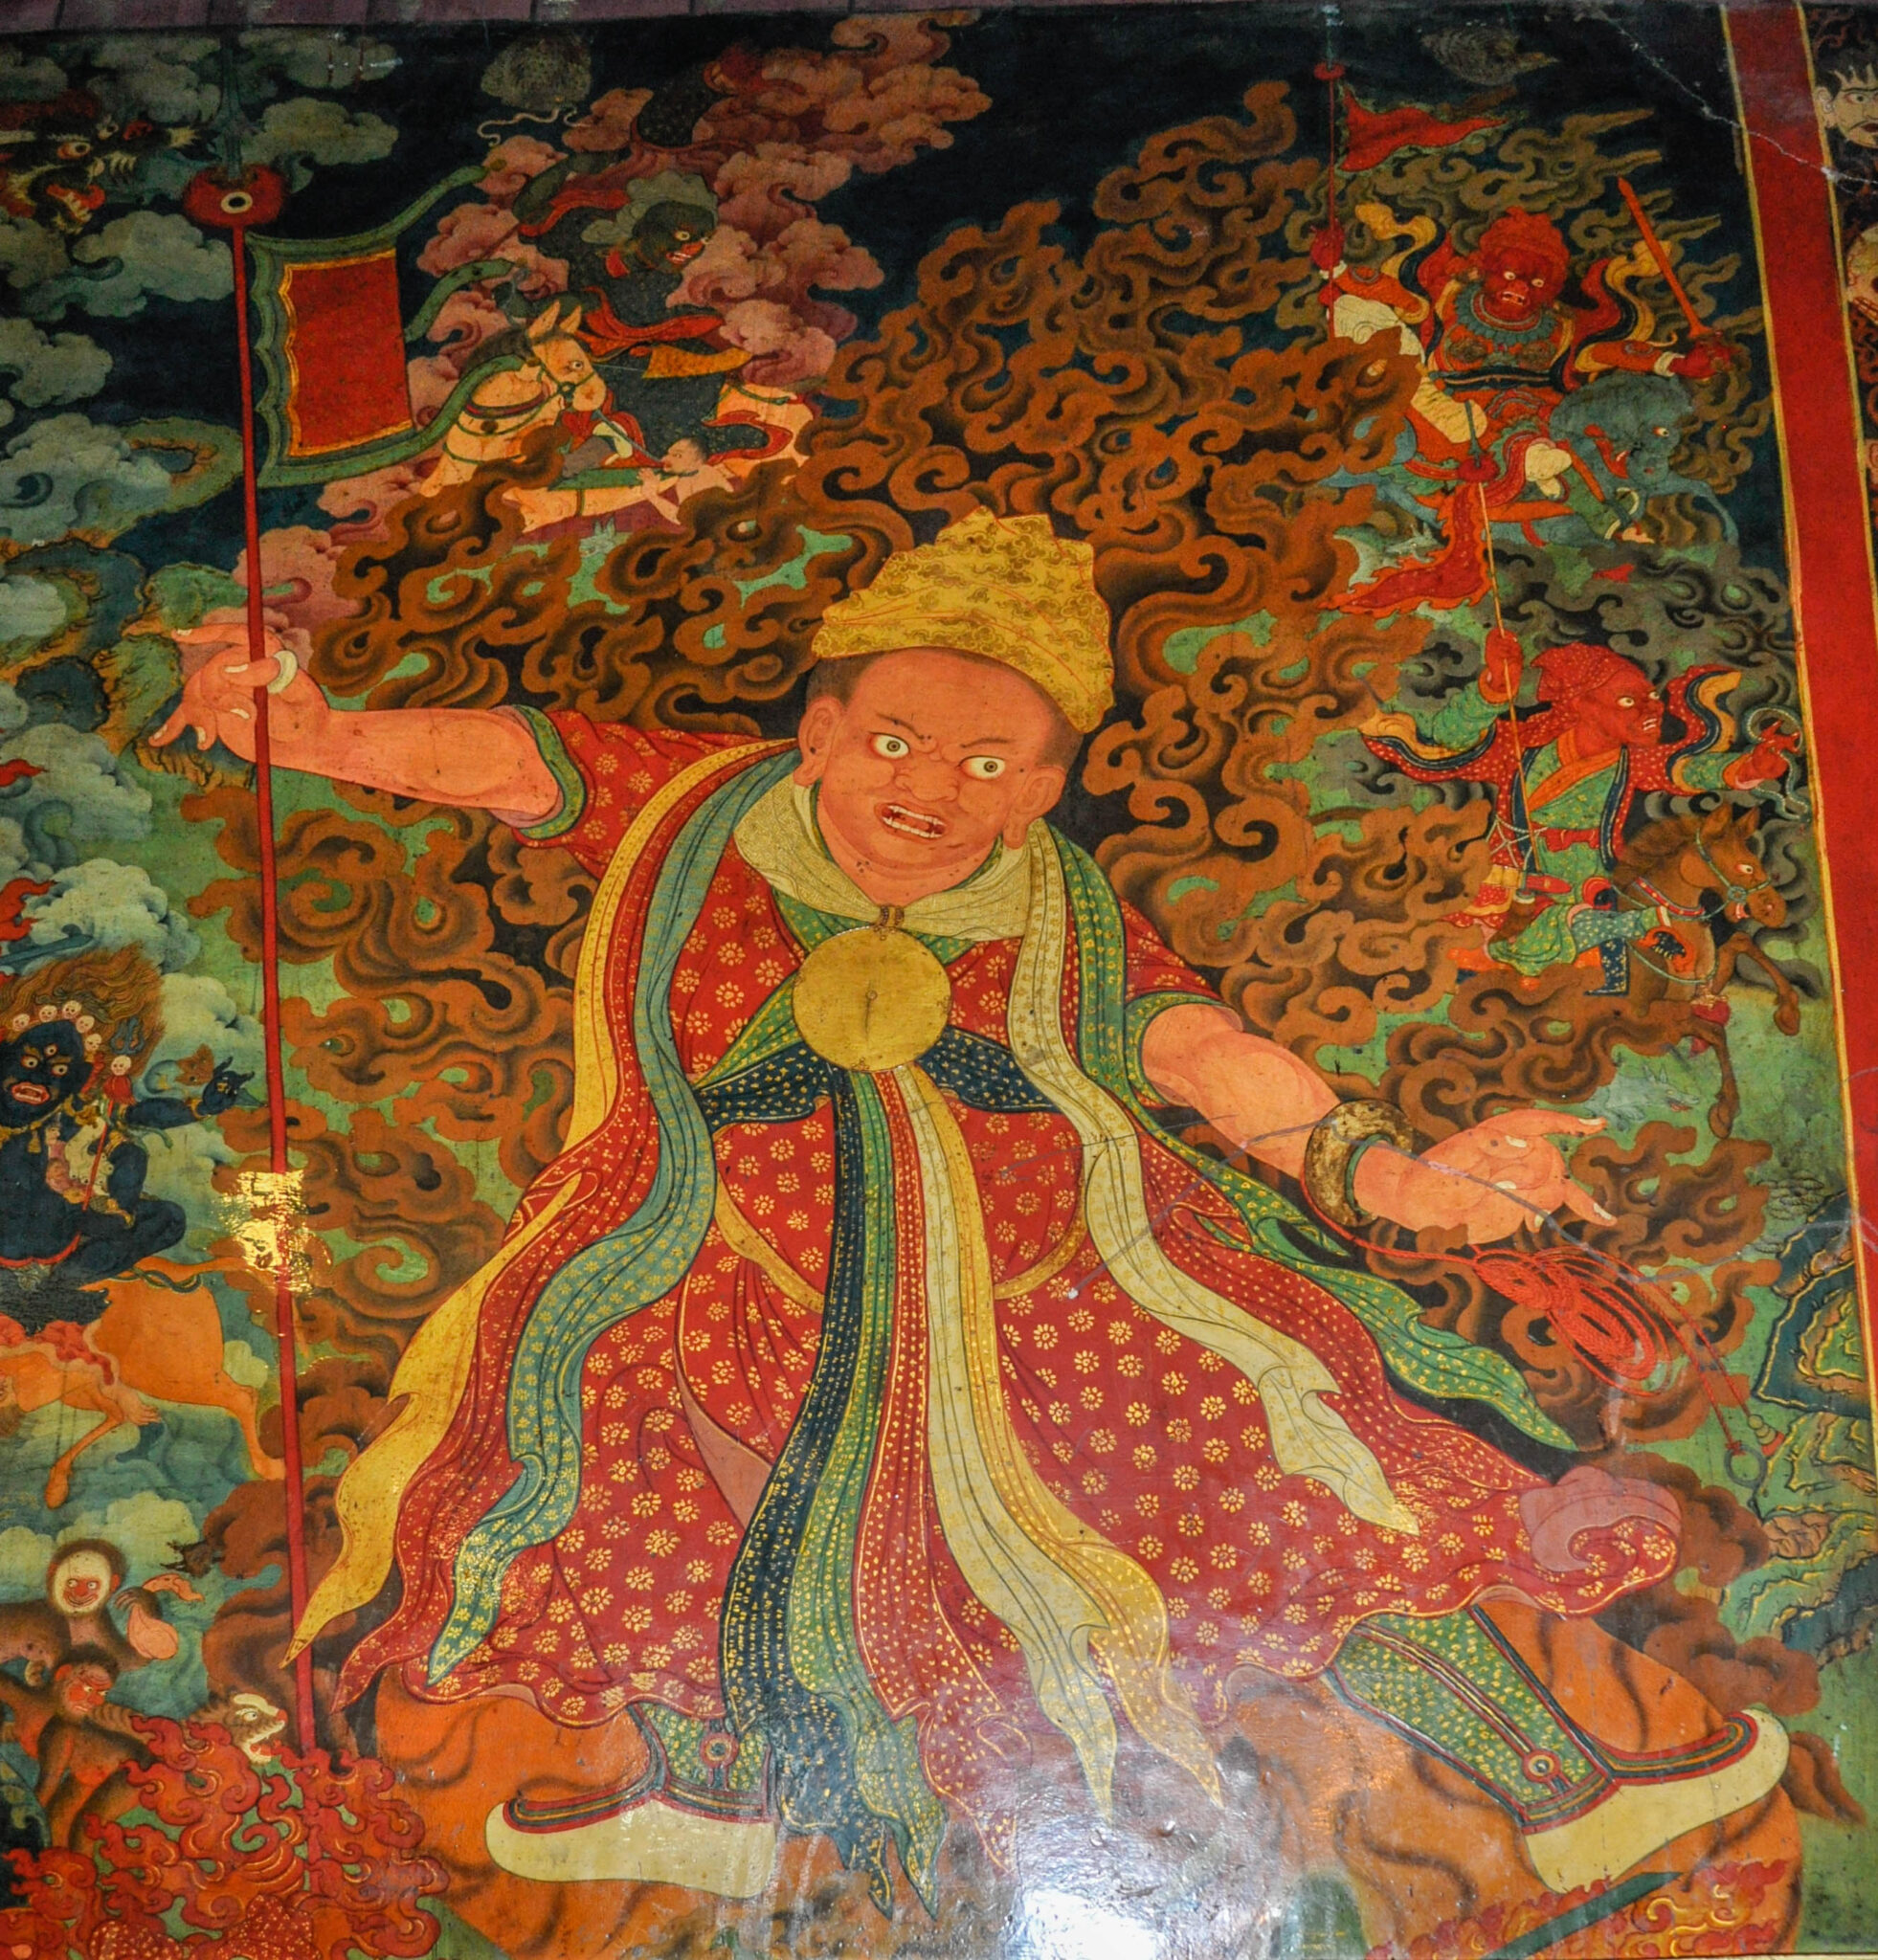 Mural depicting oracle outlined in flames wearing gold headdress, red and gold robe, and cascading ribbons